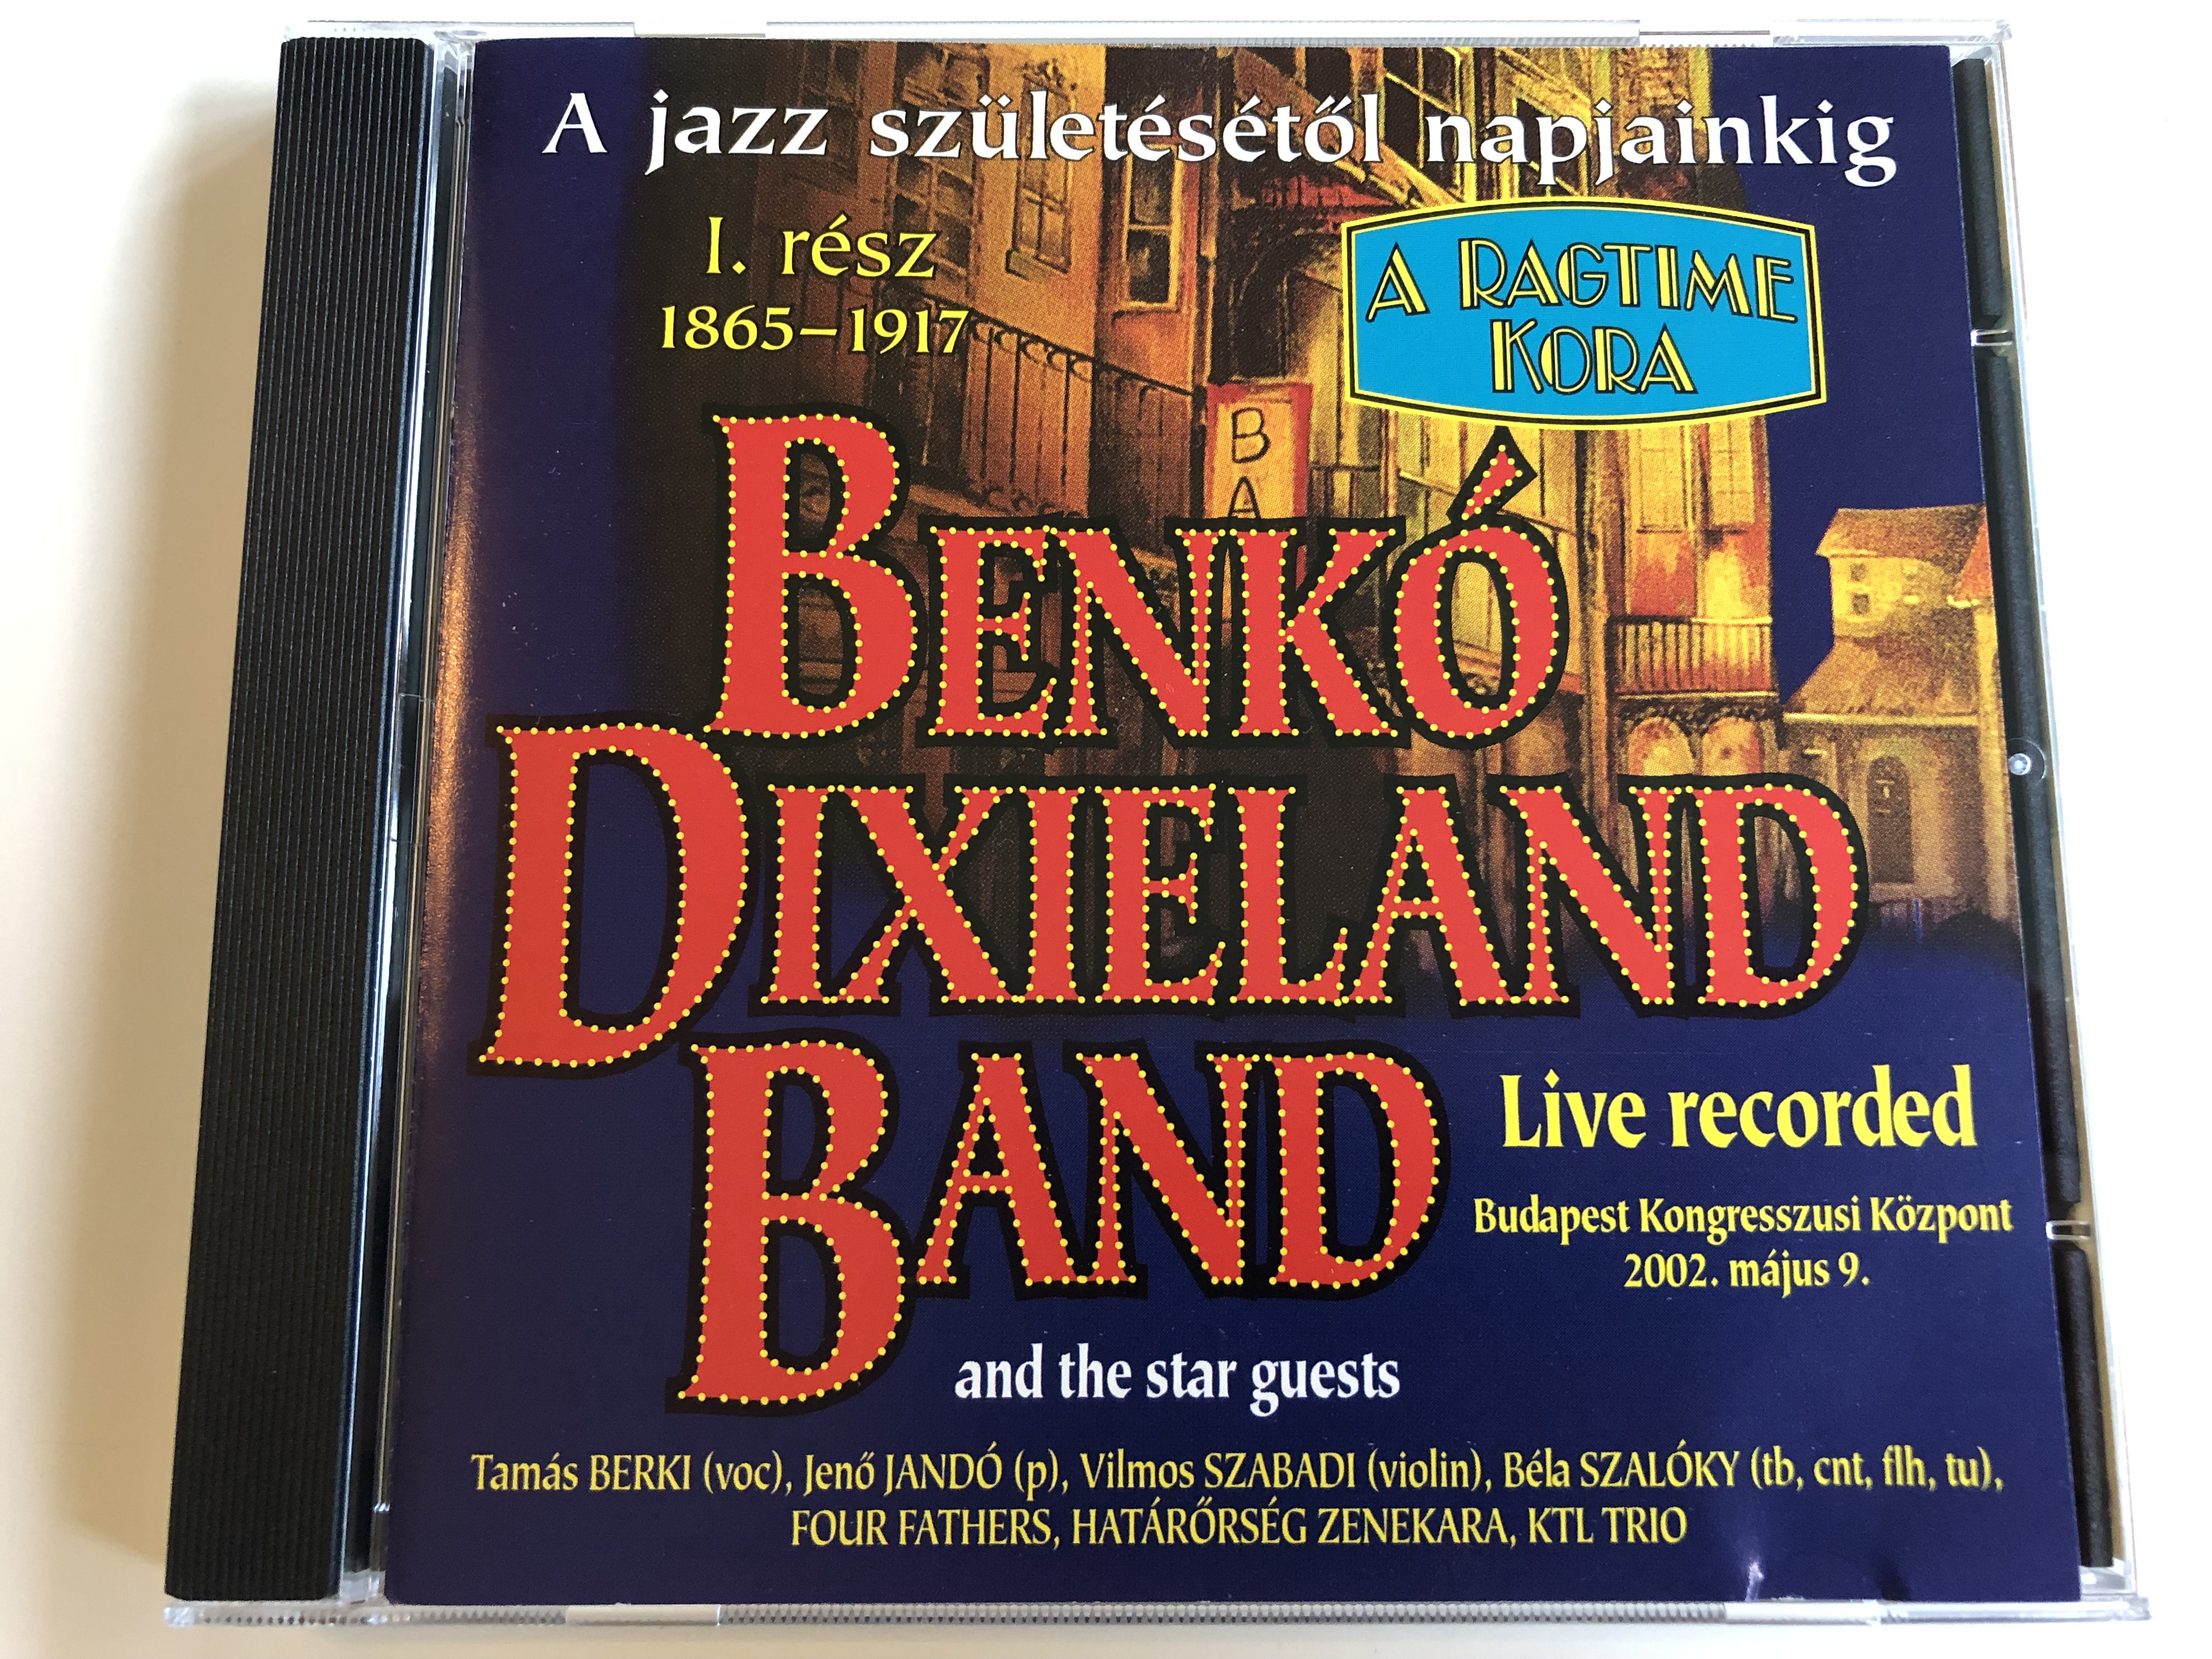 benk-dixieland-band-a-jazz-sz-let-s-t-l-napjainkig-i.-r-sz-1865-1917-audio-cd-from-the-birth-of-jazz-to-our-days-benk-dixieland-band-concert-1865-1917-the-ragtime-era-live-recording-1-.jpg